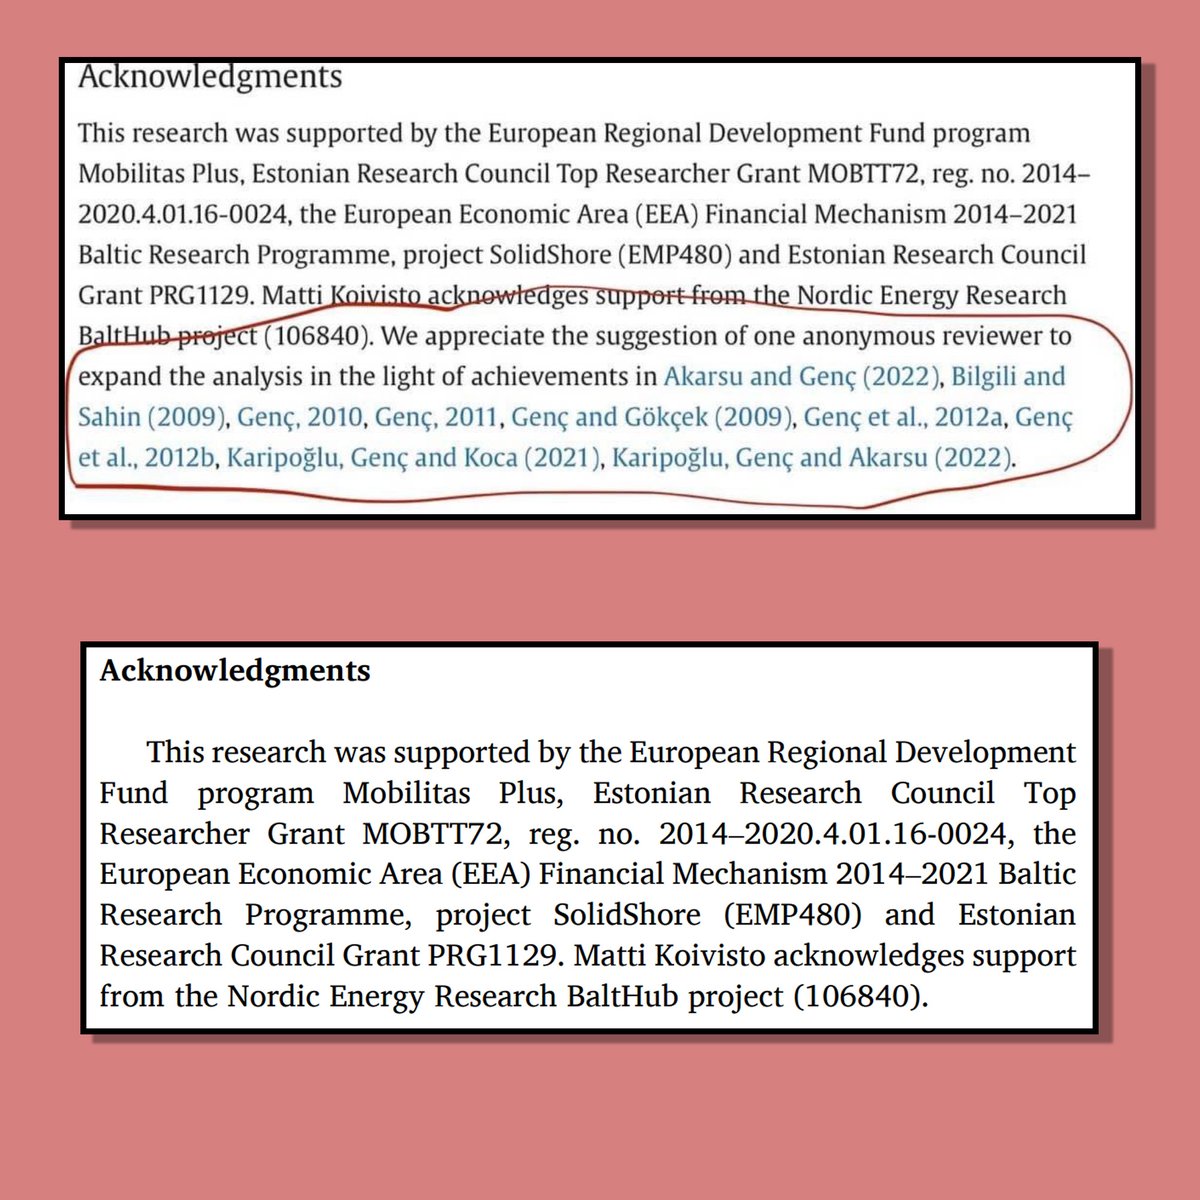 . Has an erratum been issued for this paper, or is there some other explanation why the acknowledgement section has been changed? The top image has been doing the rounds lately. We have just looked at the latest version of the paper and part of the acknowledgement has